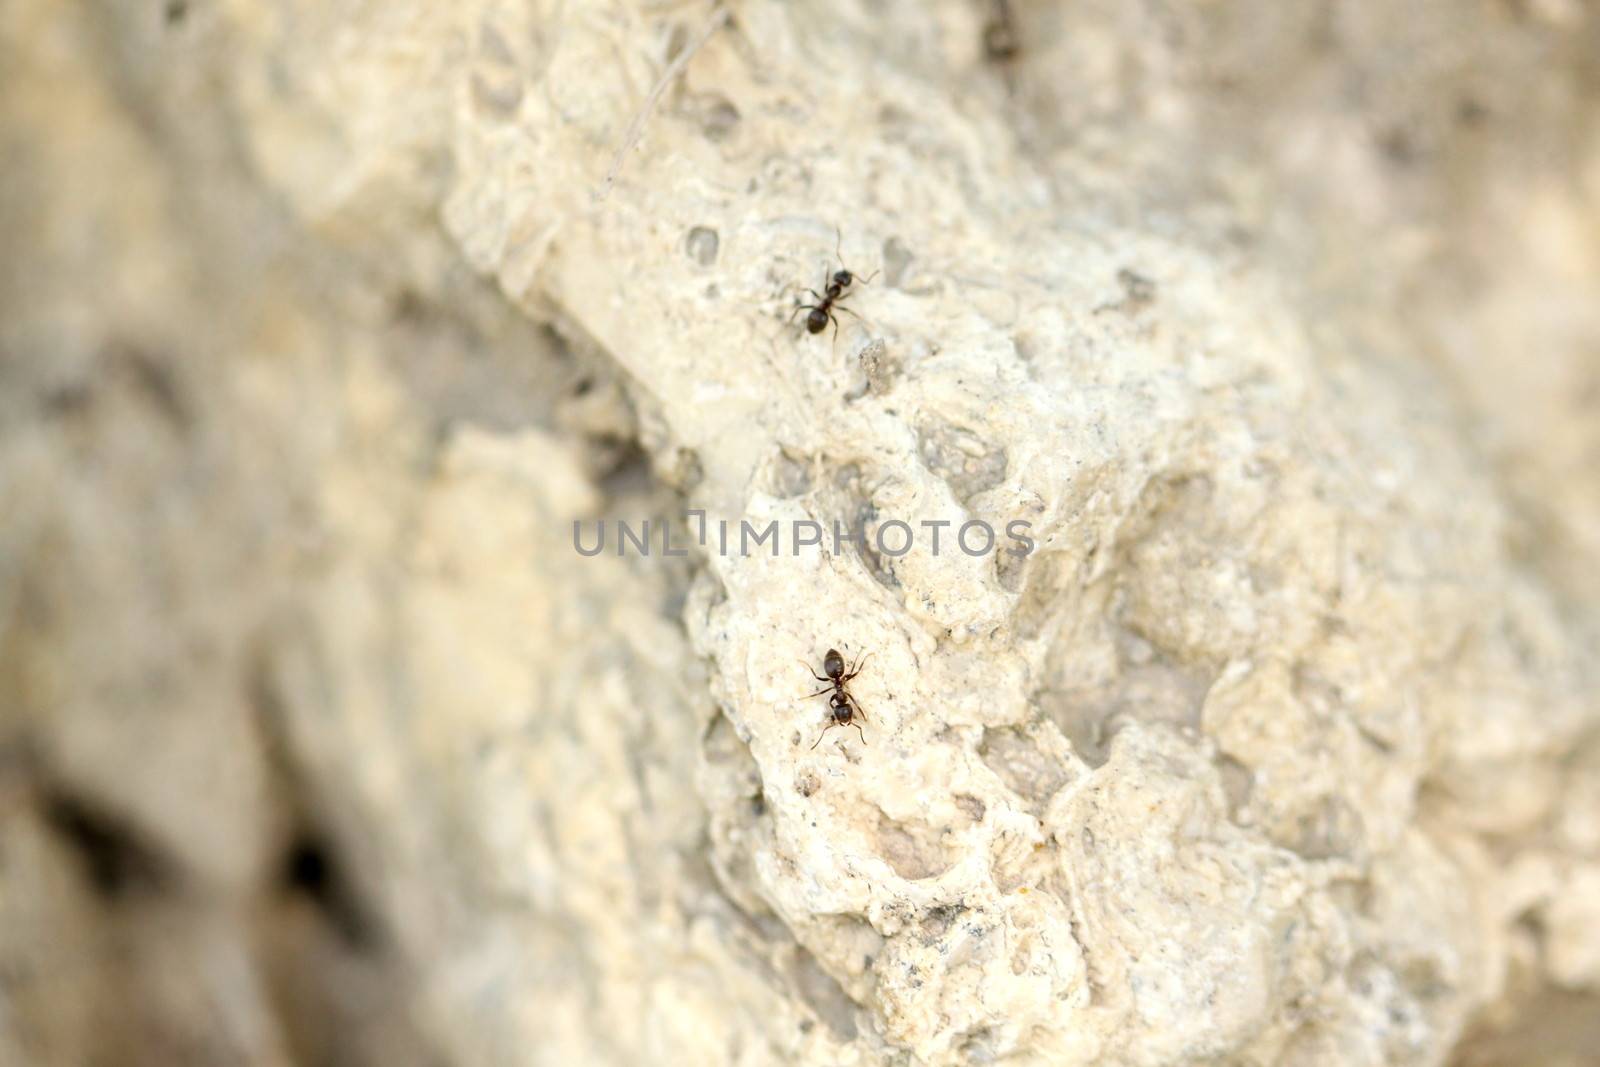 ants on the rock, macro view as background